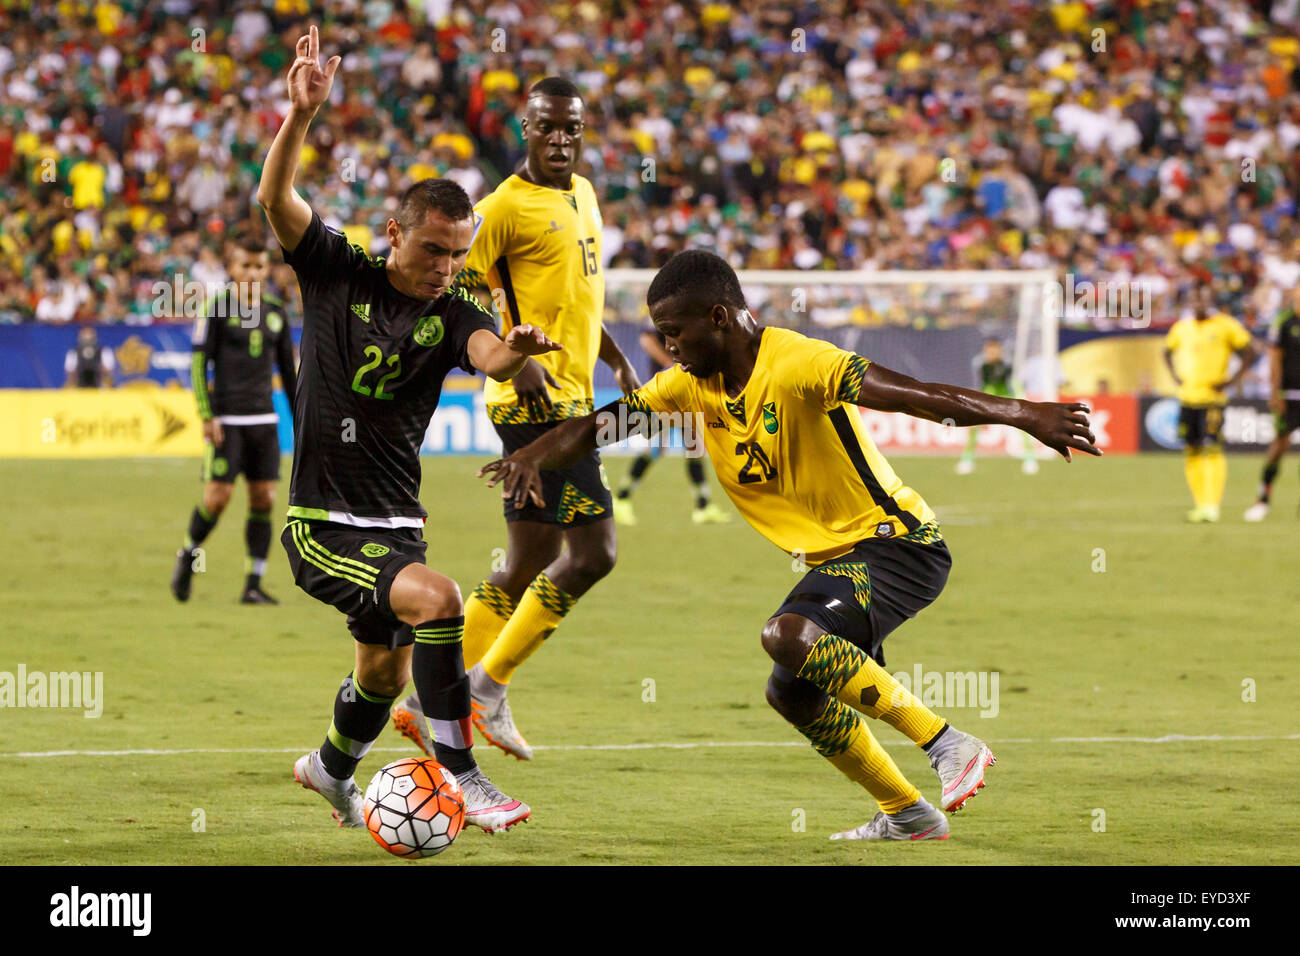 July 26, 2015: Mexico defender Paul Aguilar (22) battles with Jamaica defender Kemar Lawrence (20) for the ball during the CONCACAF Gold Cup 2015 Final match between Jamaica and Mexico at Lincoln Financial Field in Philadelphia, Pennsylvania. Mexico won 3-1. Christopher Szagola/CSM Stock Photo